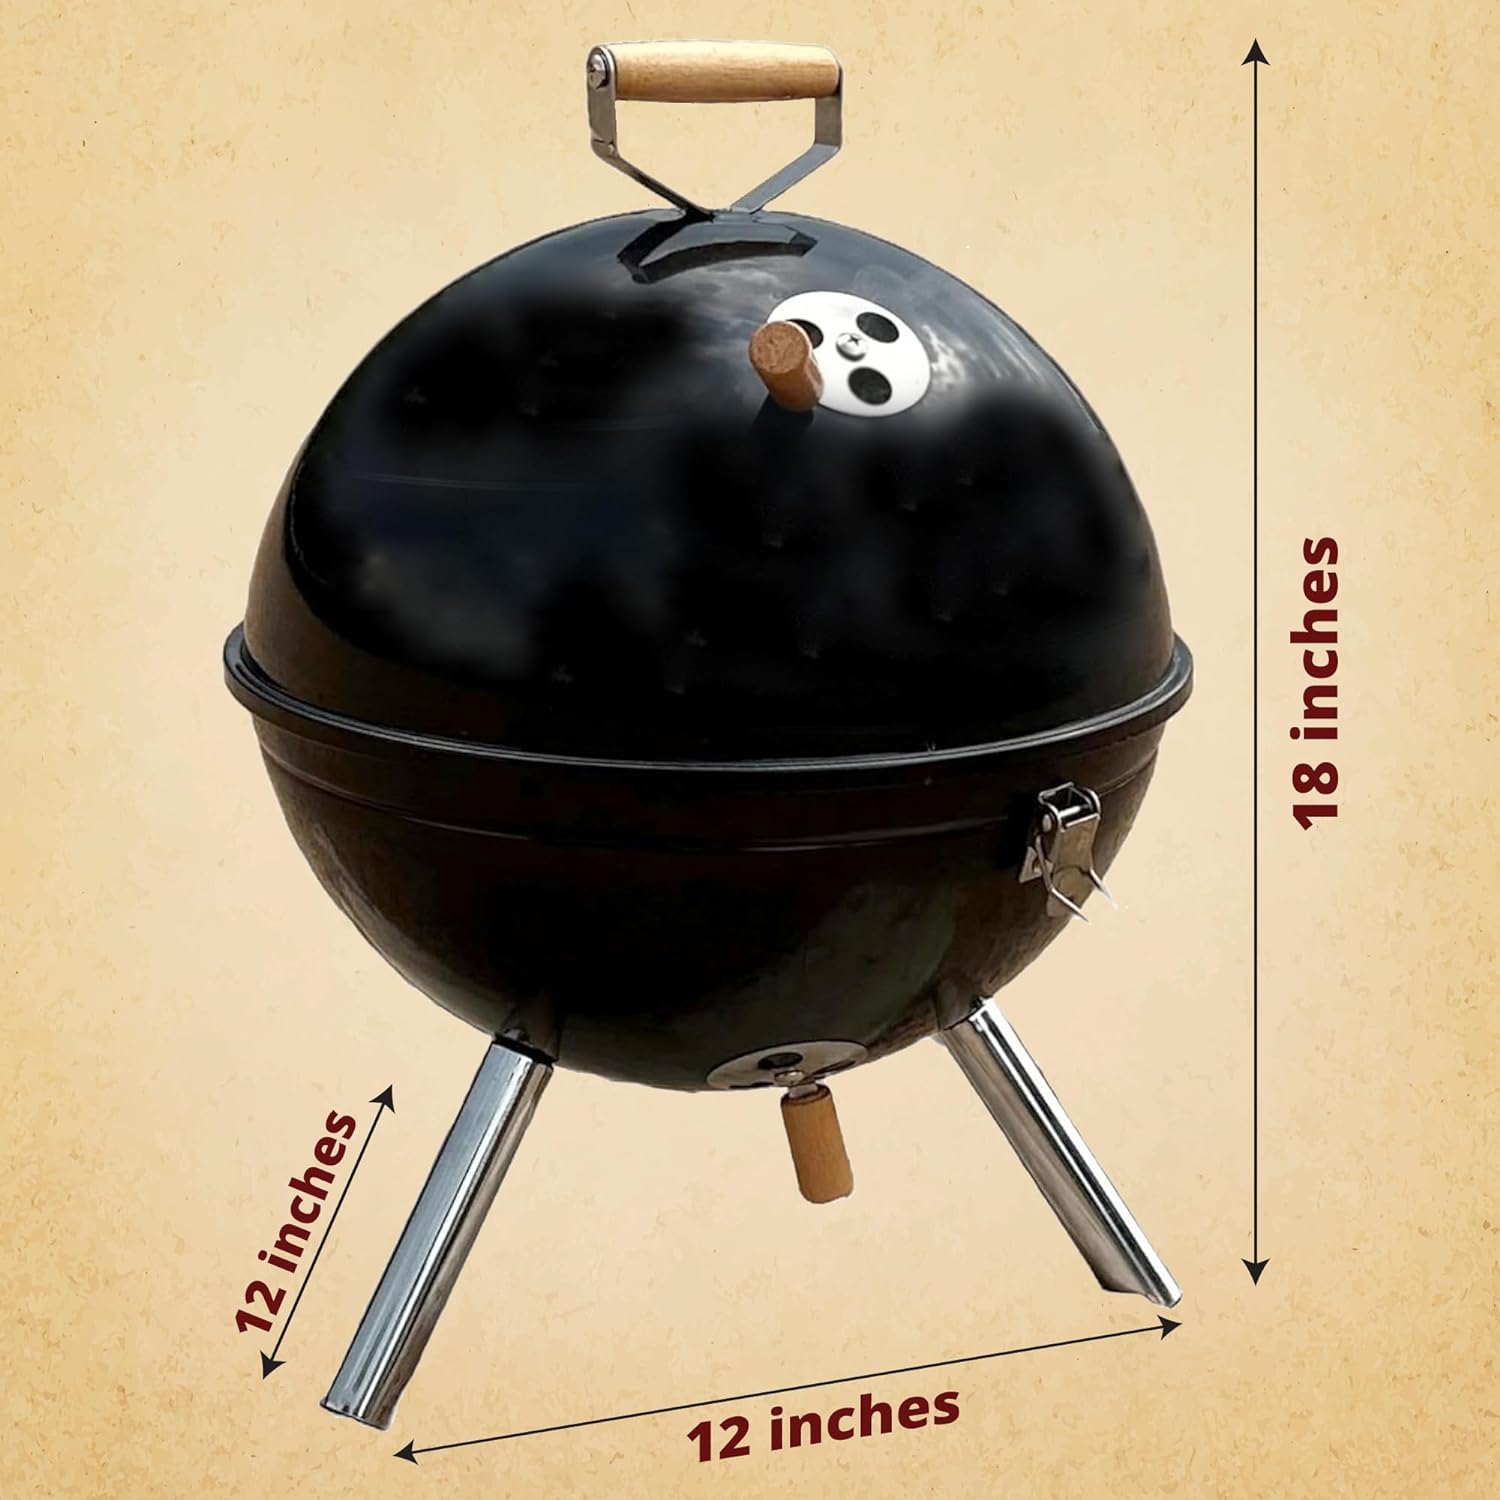 Freedom Stove Ball-B-Q 12-Inch Portable Charcoal Grill - Perfect for Tailgating, Camping  Outdoor Feasts, Sleek Black